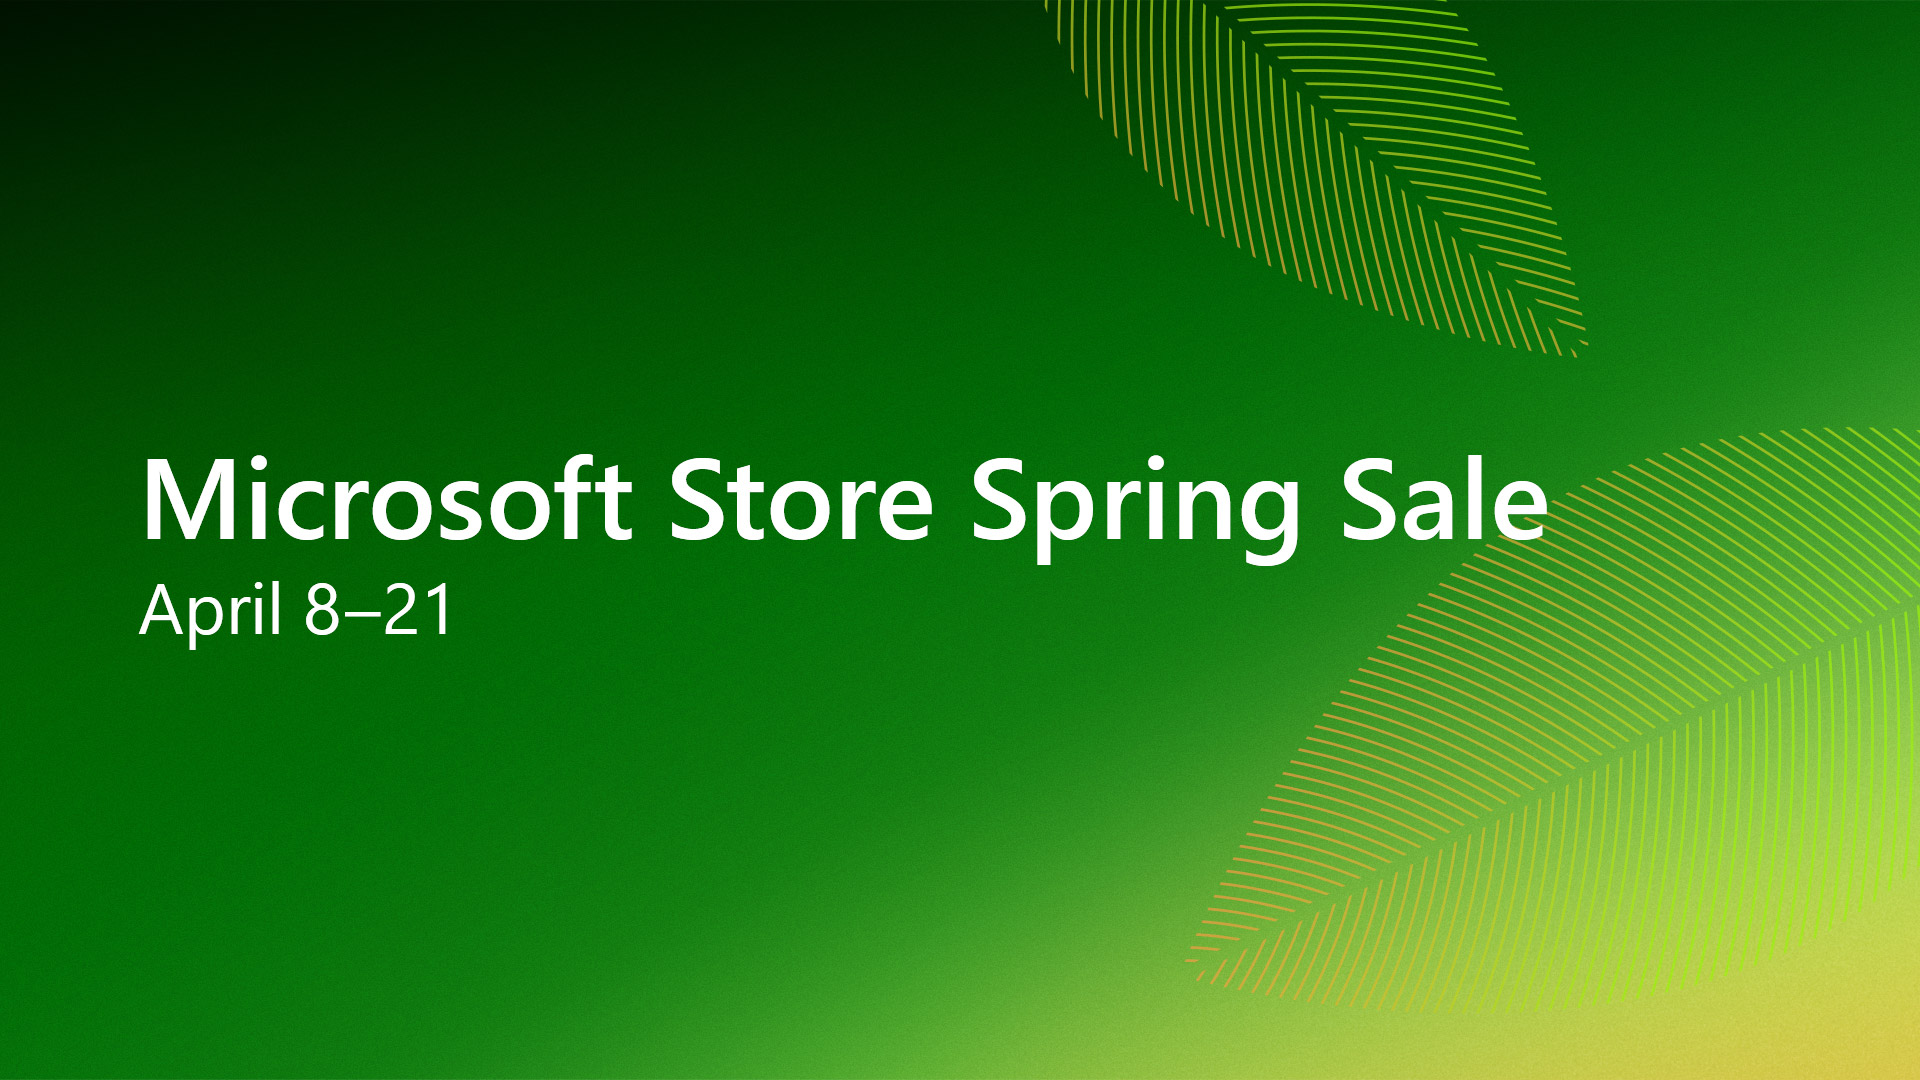 Video For Microsoft Store Spring Sale: Hot Deals on Xbox Games, Gaming PCs, and More